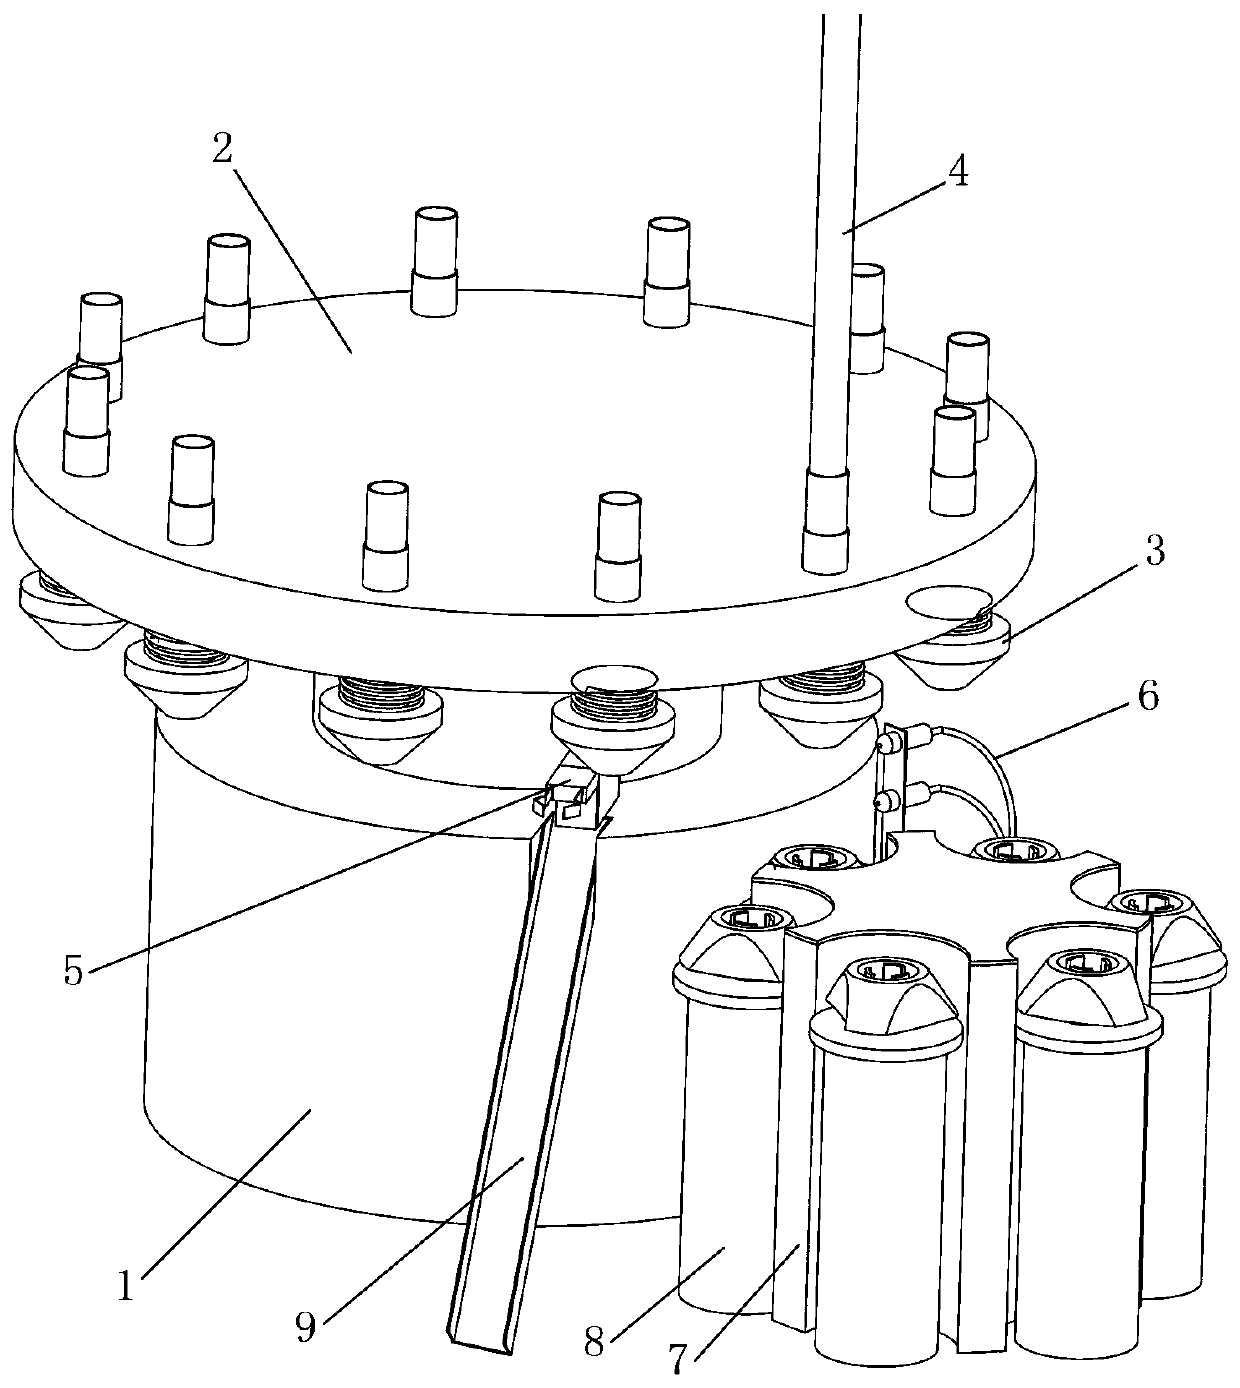 Rejecting apparatus with automatic glass tube head clamping function